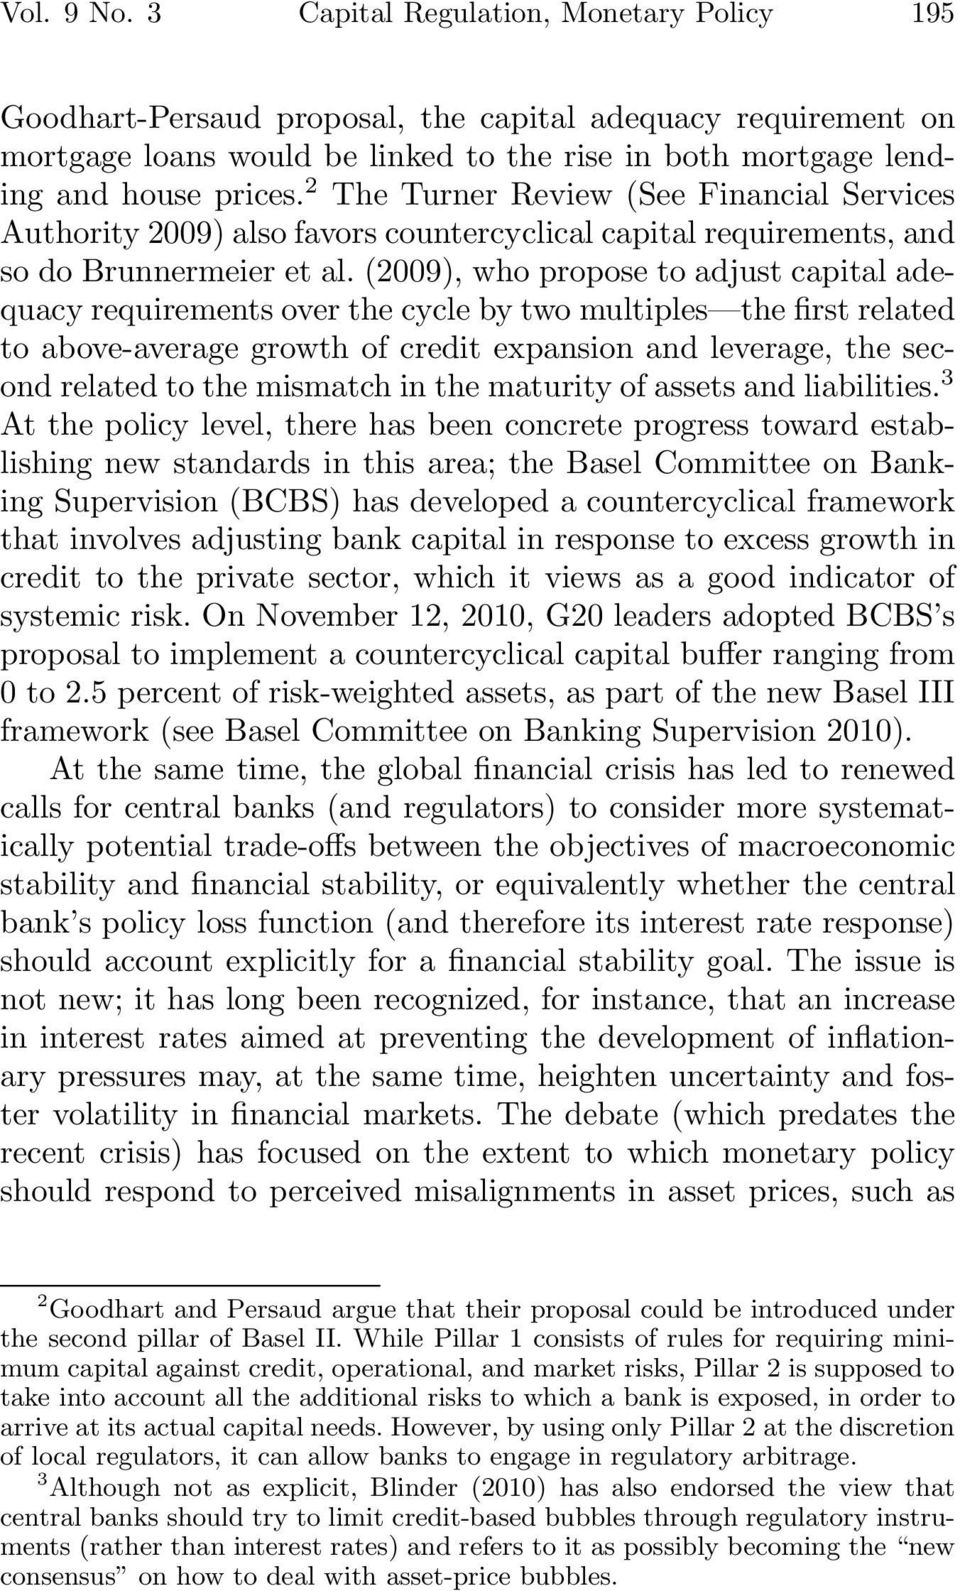 2 The Turner Review (See Financial Services Authority 2009) also favors countercyclical capital requirements, and so do Brunnermeier et al.